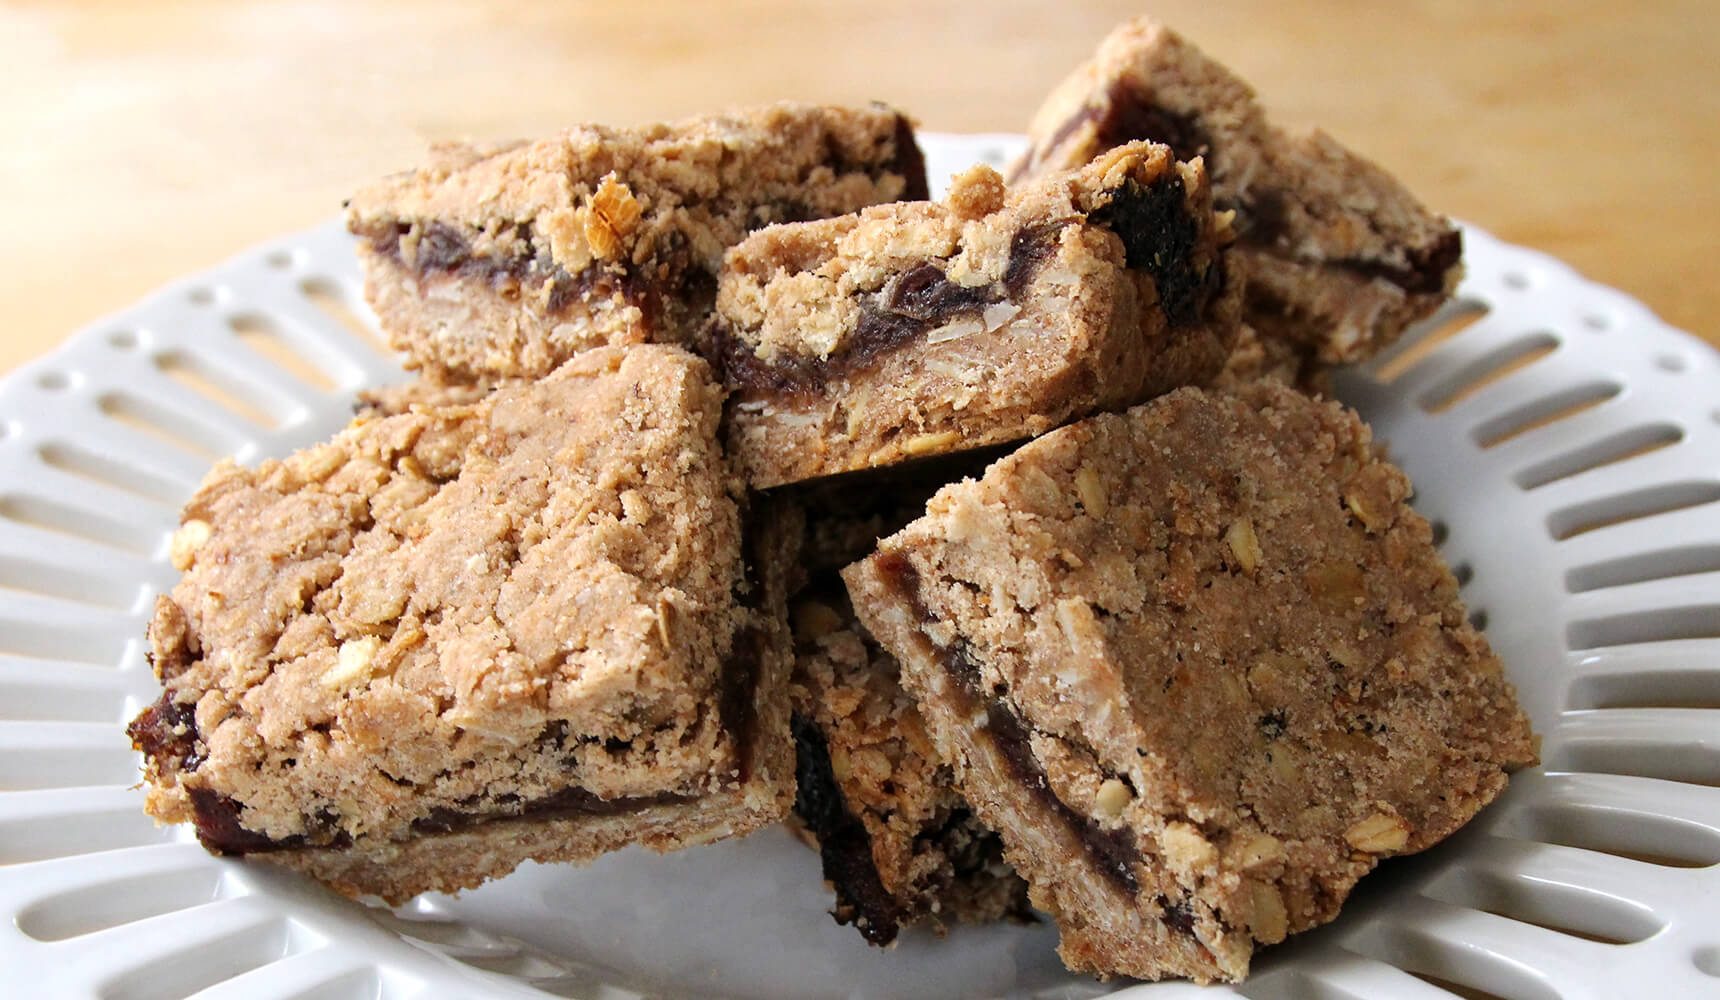 BROWN BUTTER DATE BARS